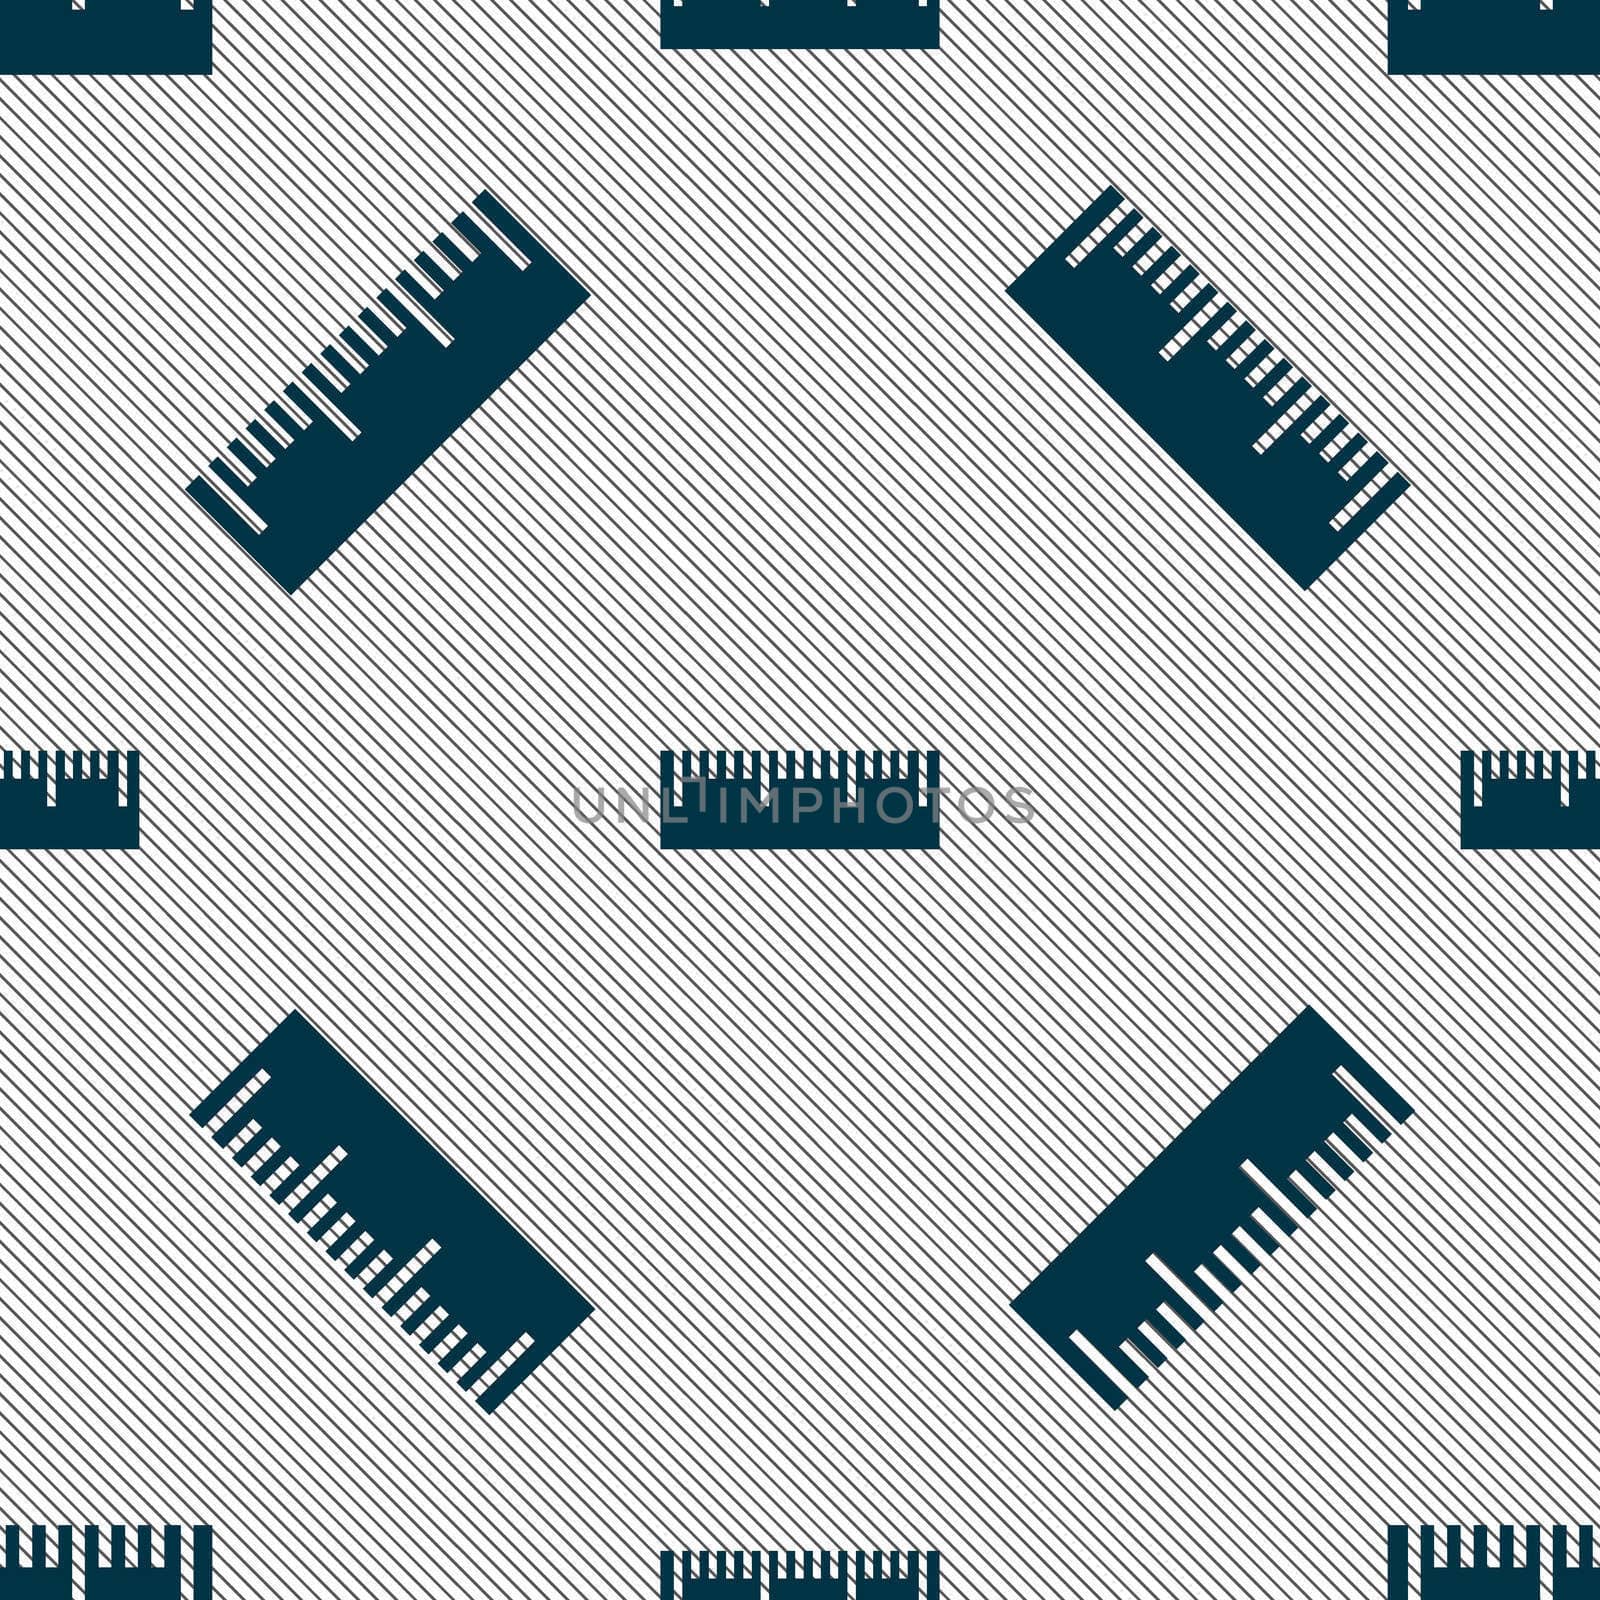 Ruler sign icon. School tool symbol. Seamless pattern with geometric texture. illustration